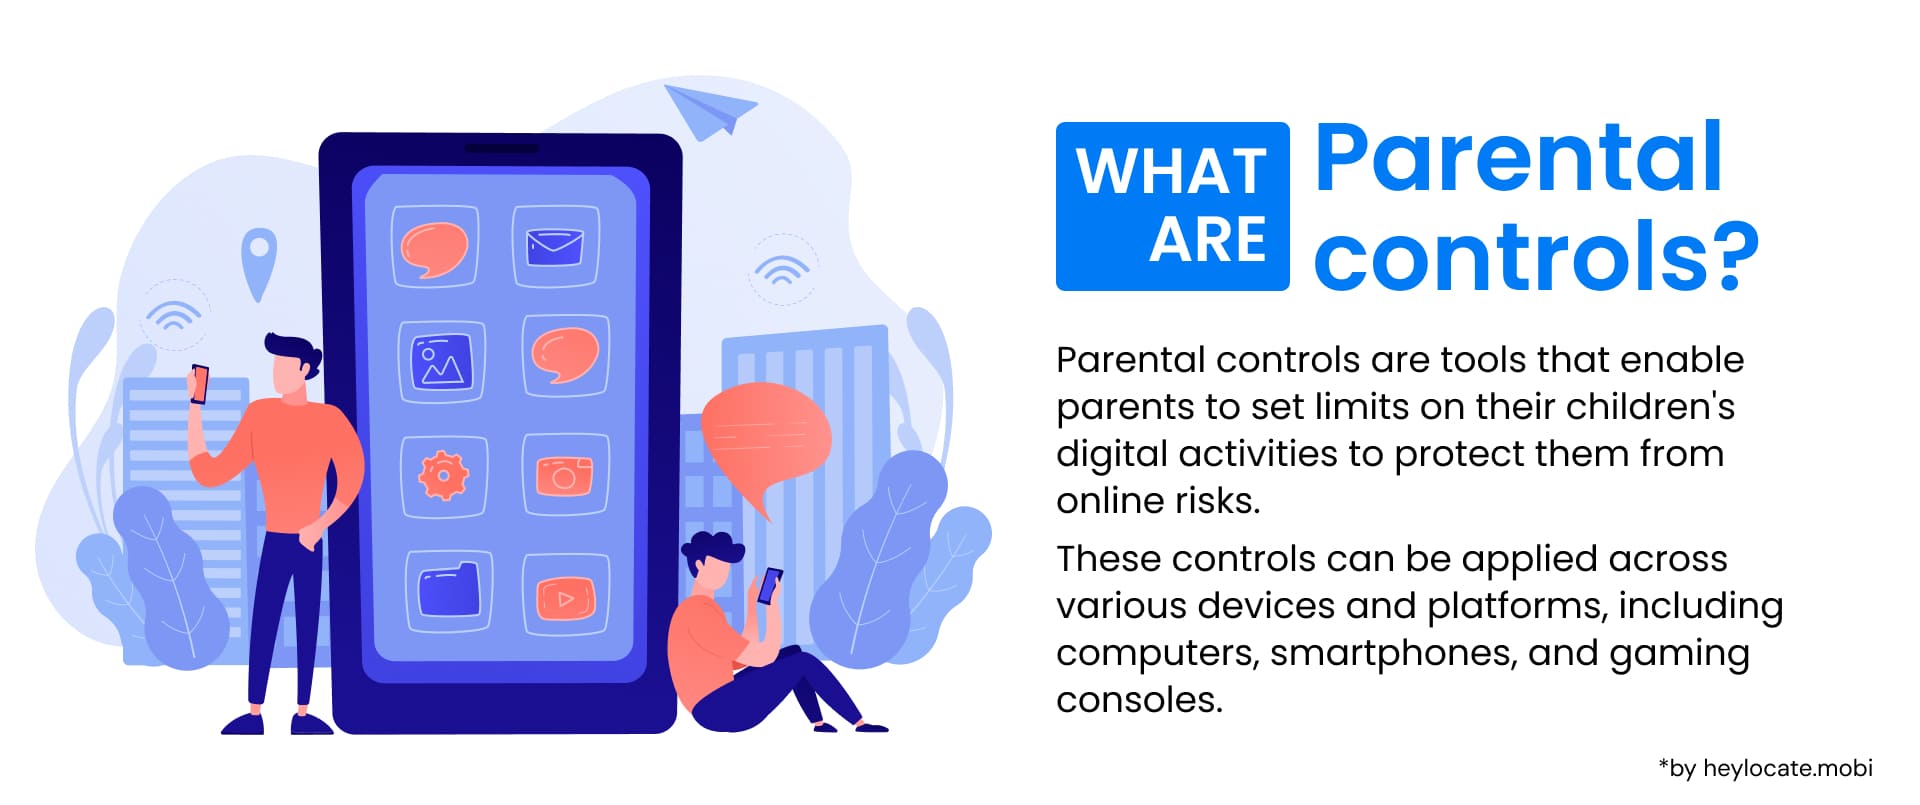 An infographic defining parental controls with illustrations of a parent and child using devices with control settings